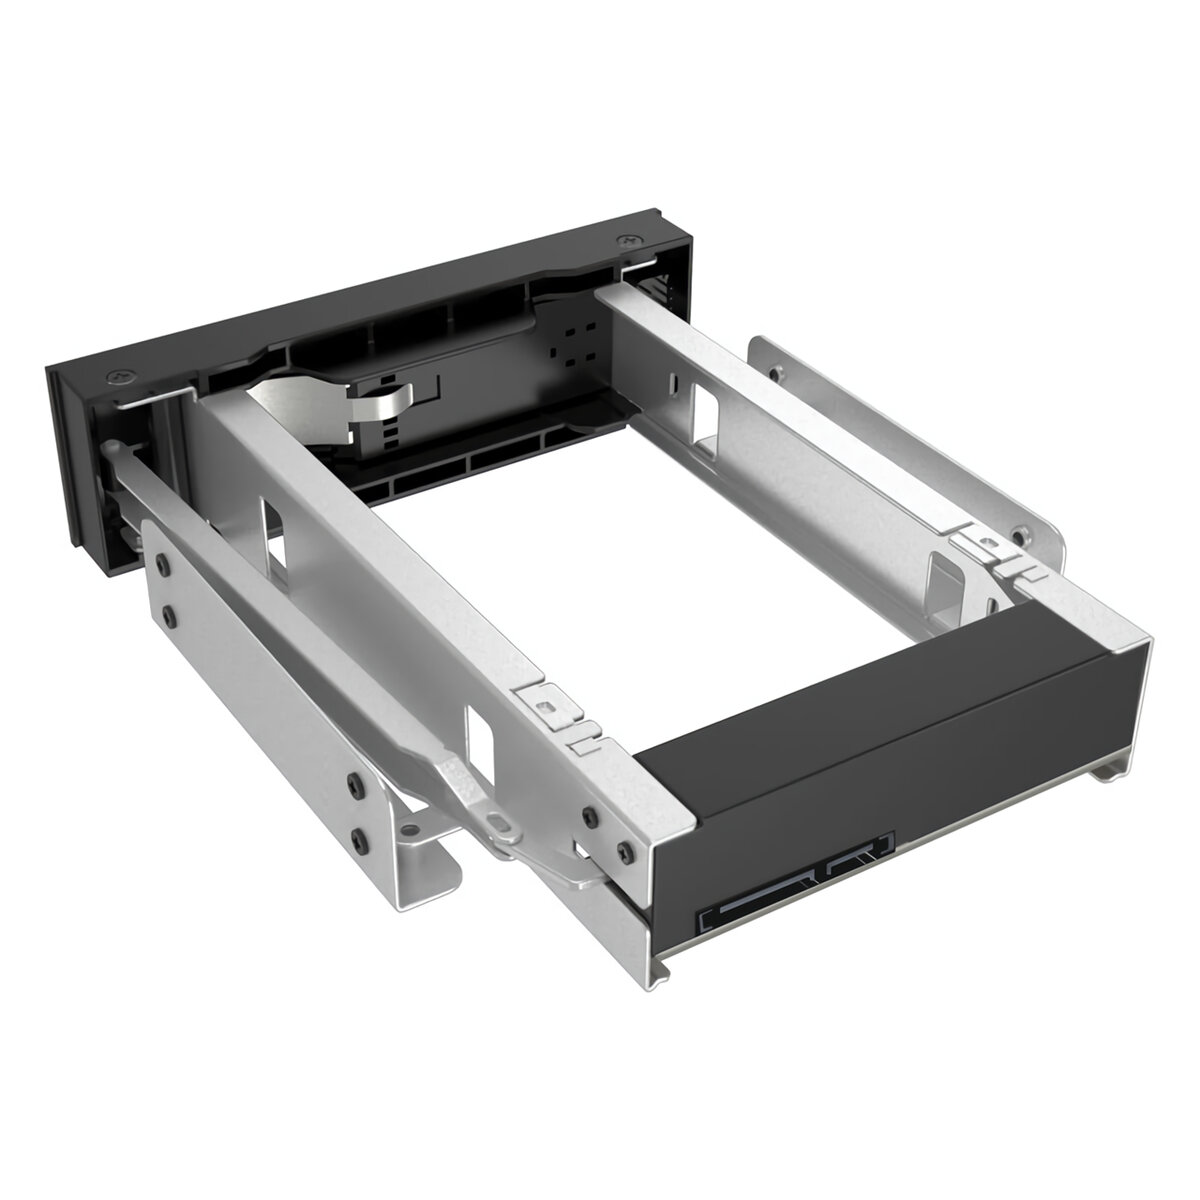 

ORICO 1106SS 3.5 inch 5.25 Bay Stainless Internal Hard Drive Mounting Bracket Adapter HDD Enclosure